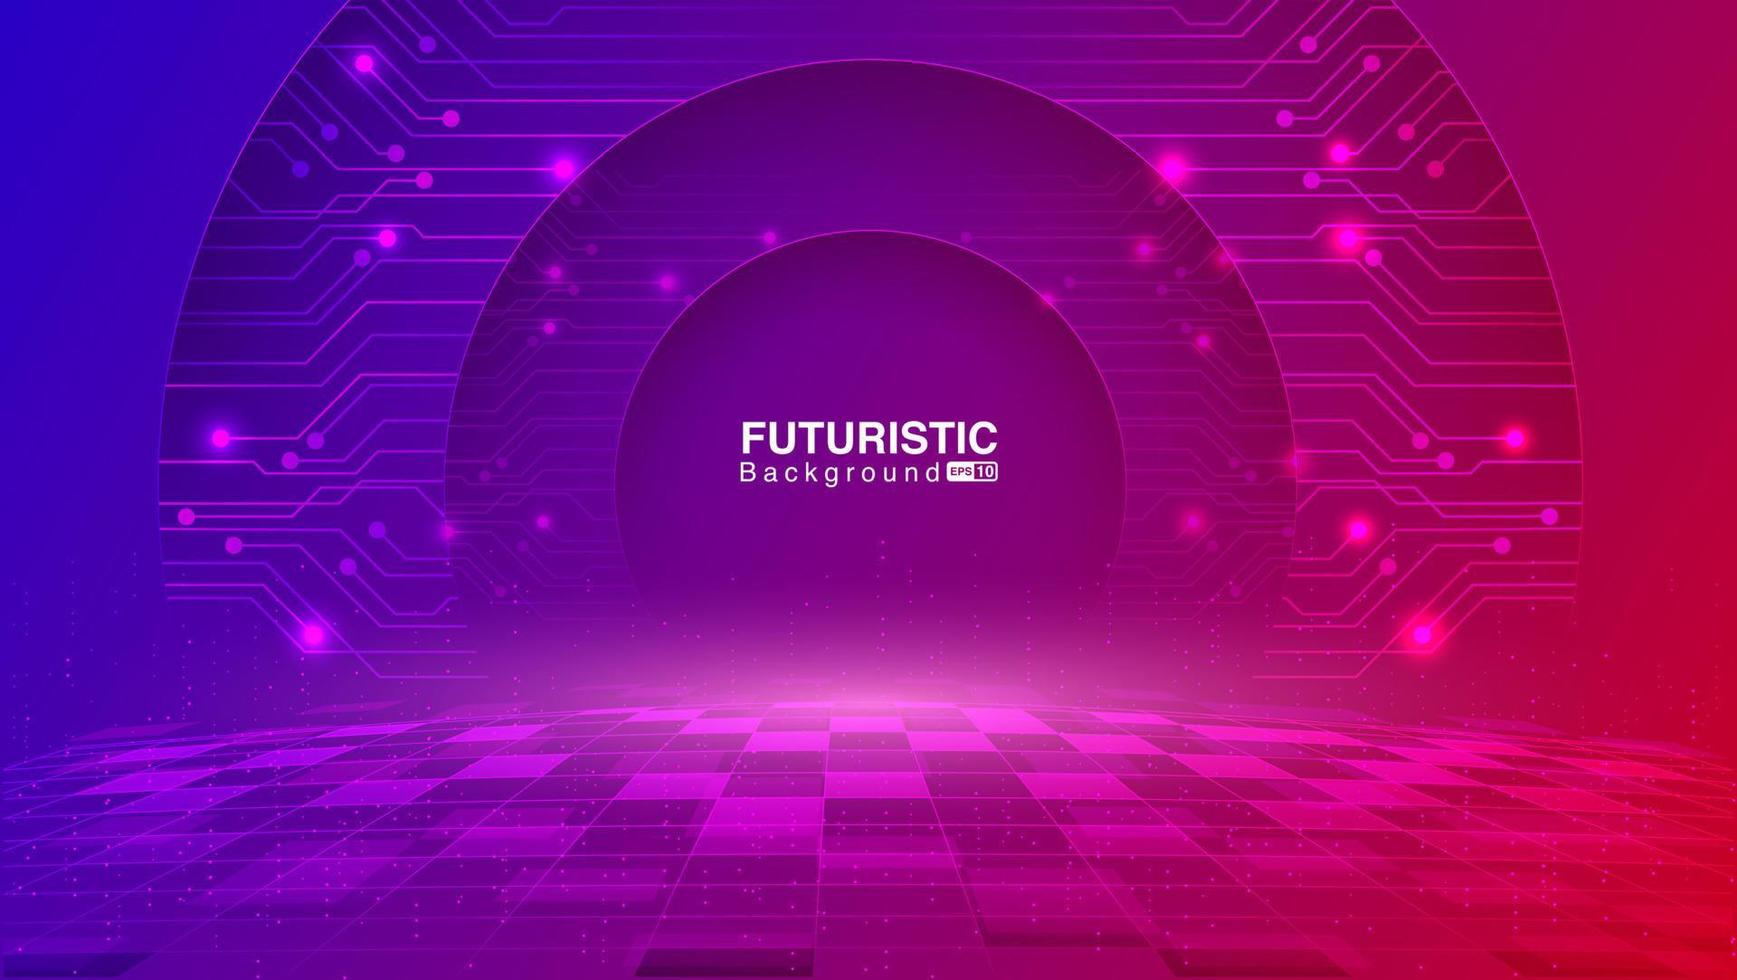 Abstract Technology Background. Futuristic Background Concept. Vector EPS 10